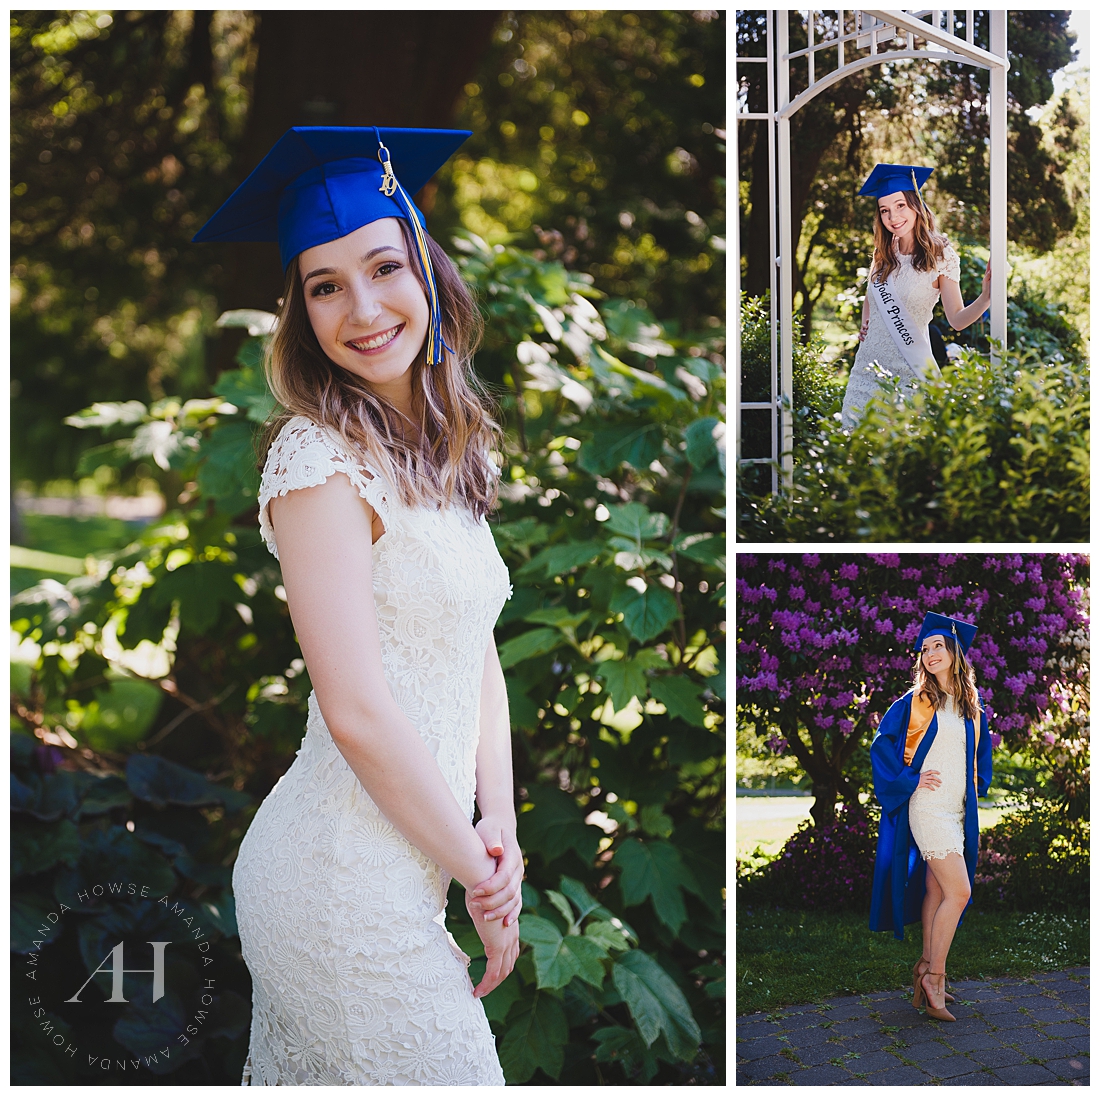 Senior portraits with graduation outfit and cap and gown photographed by Tacoma senior photographer Amanda Howse